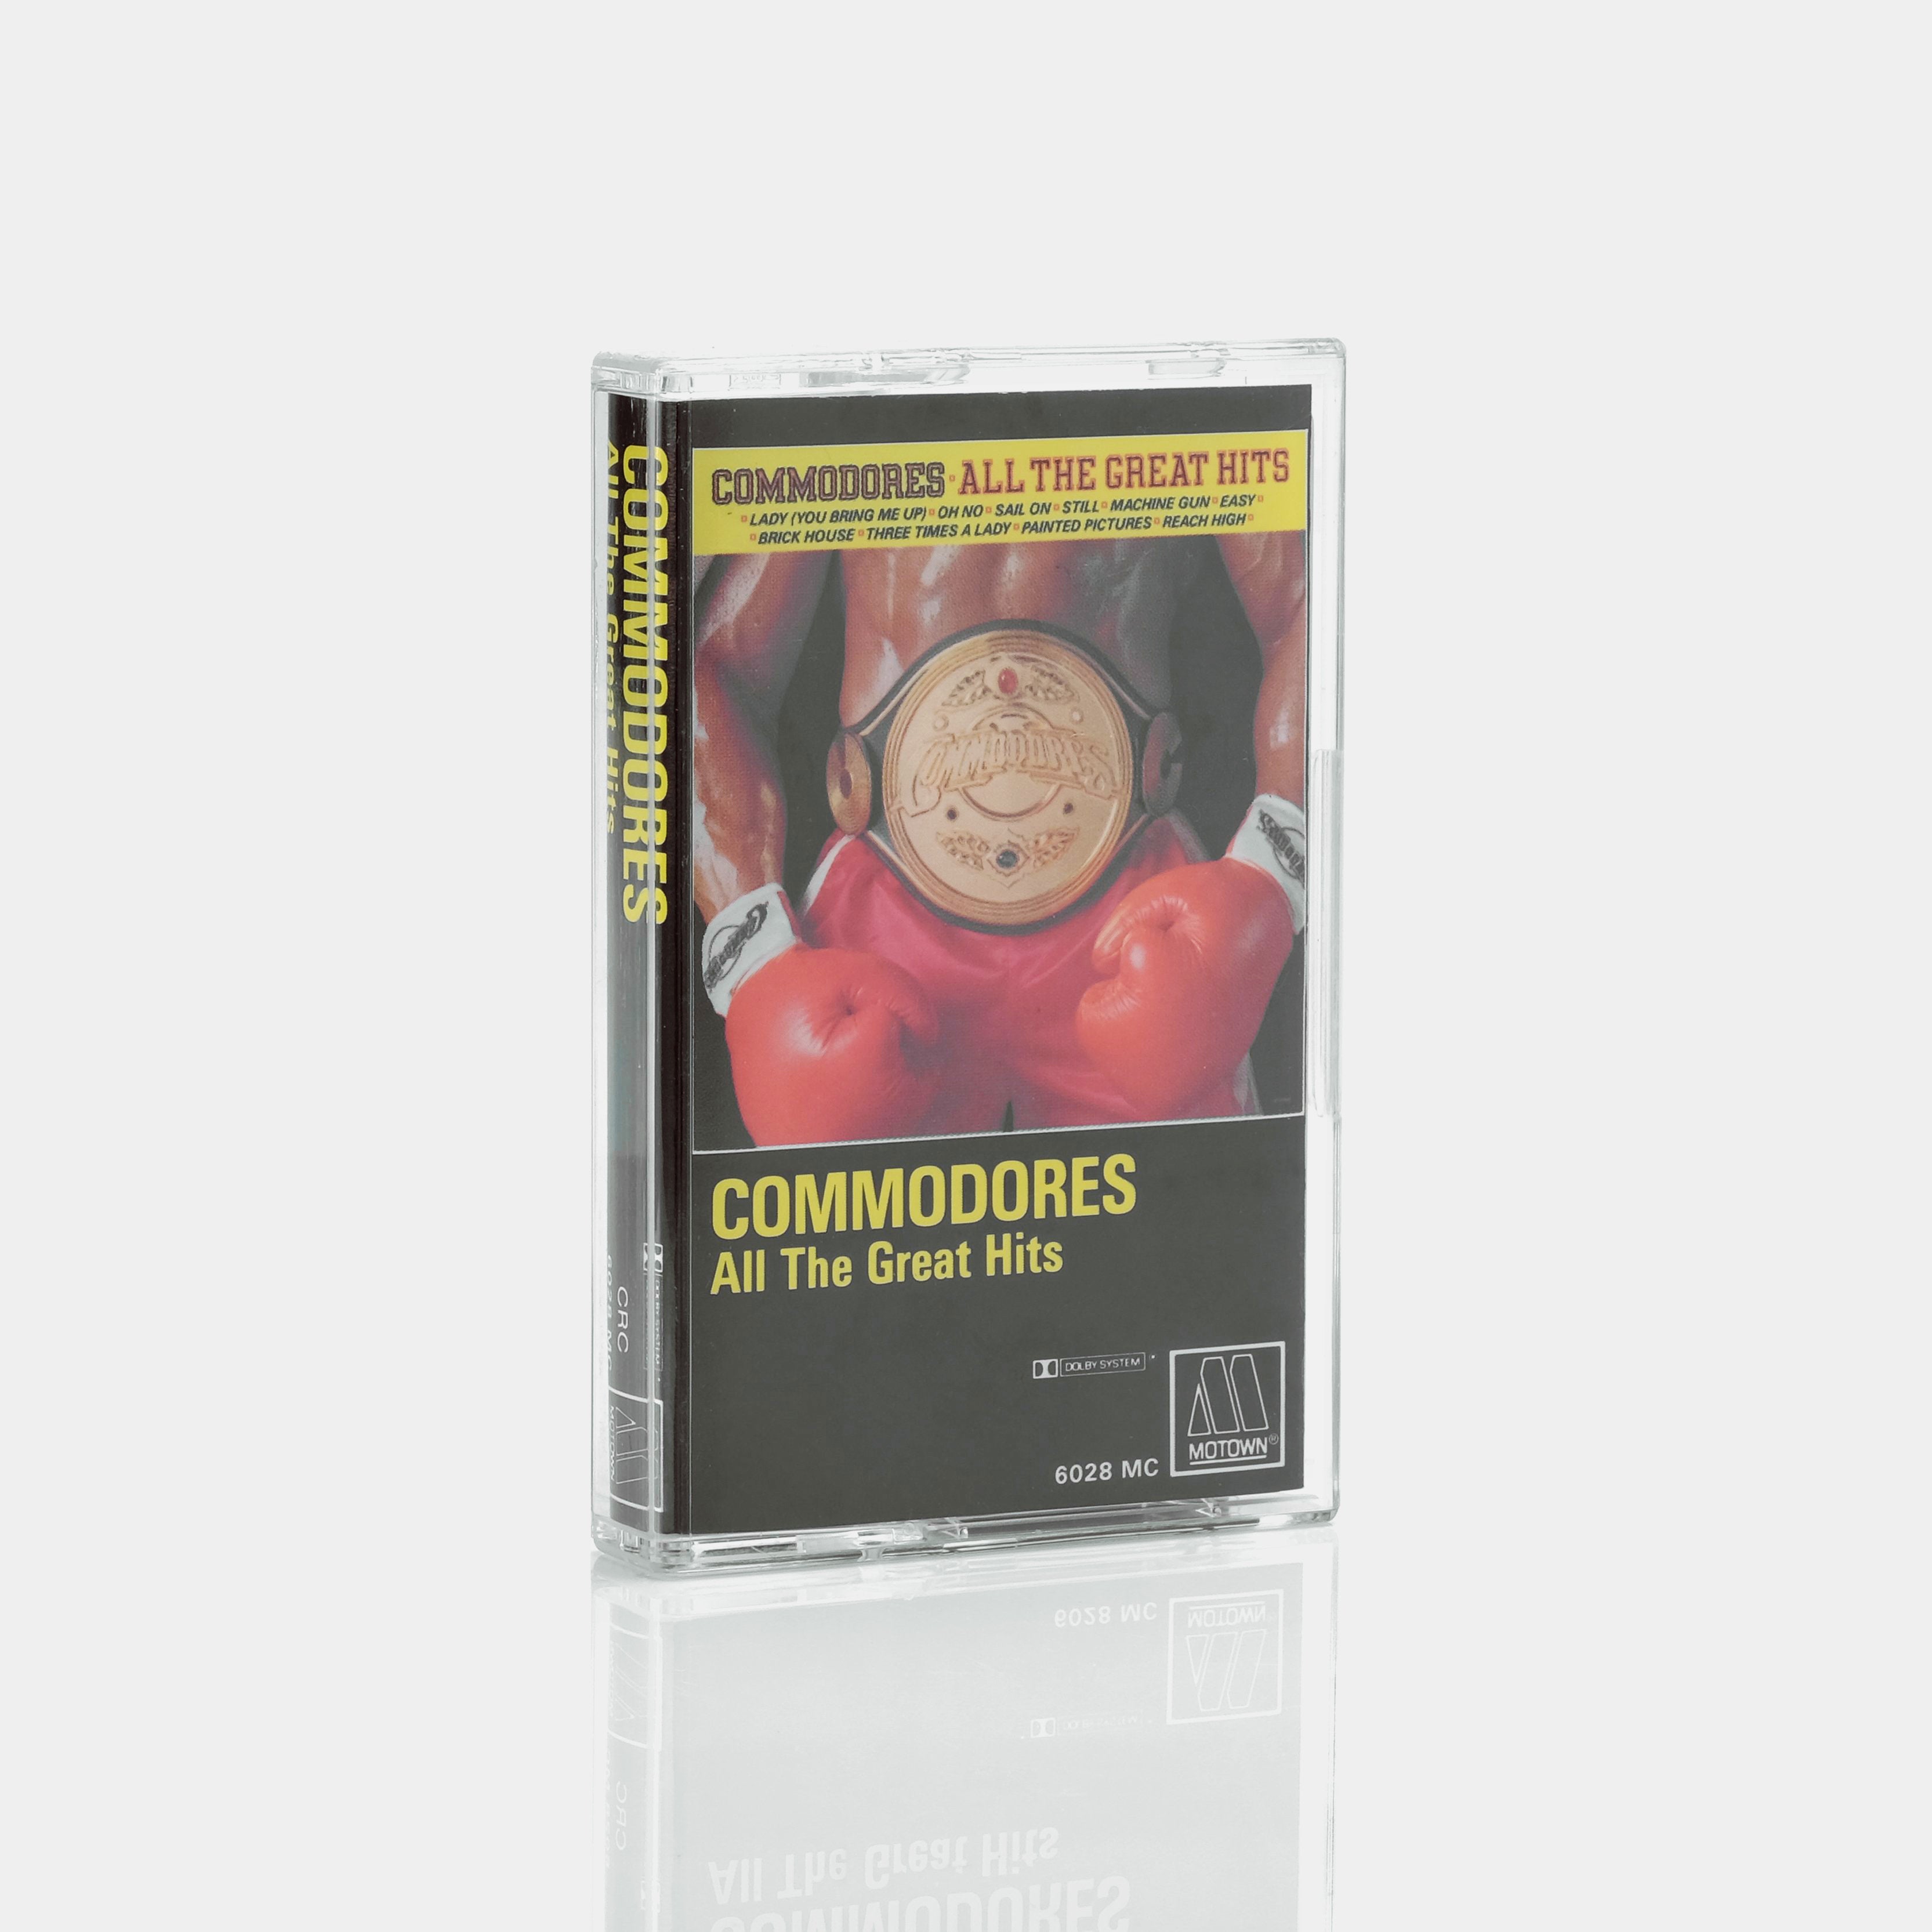 Commodores - All The Great Hits Cassette Tape